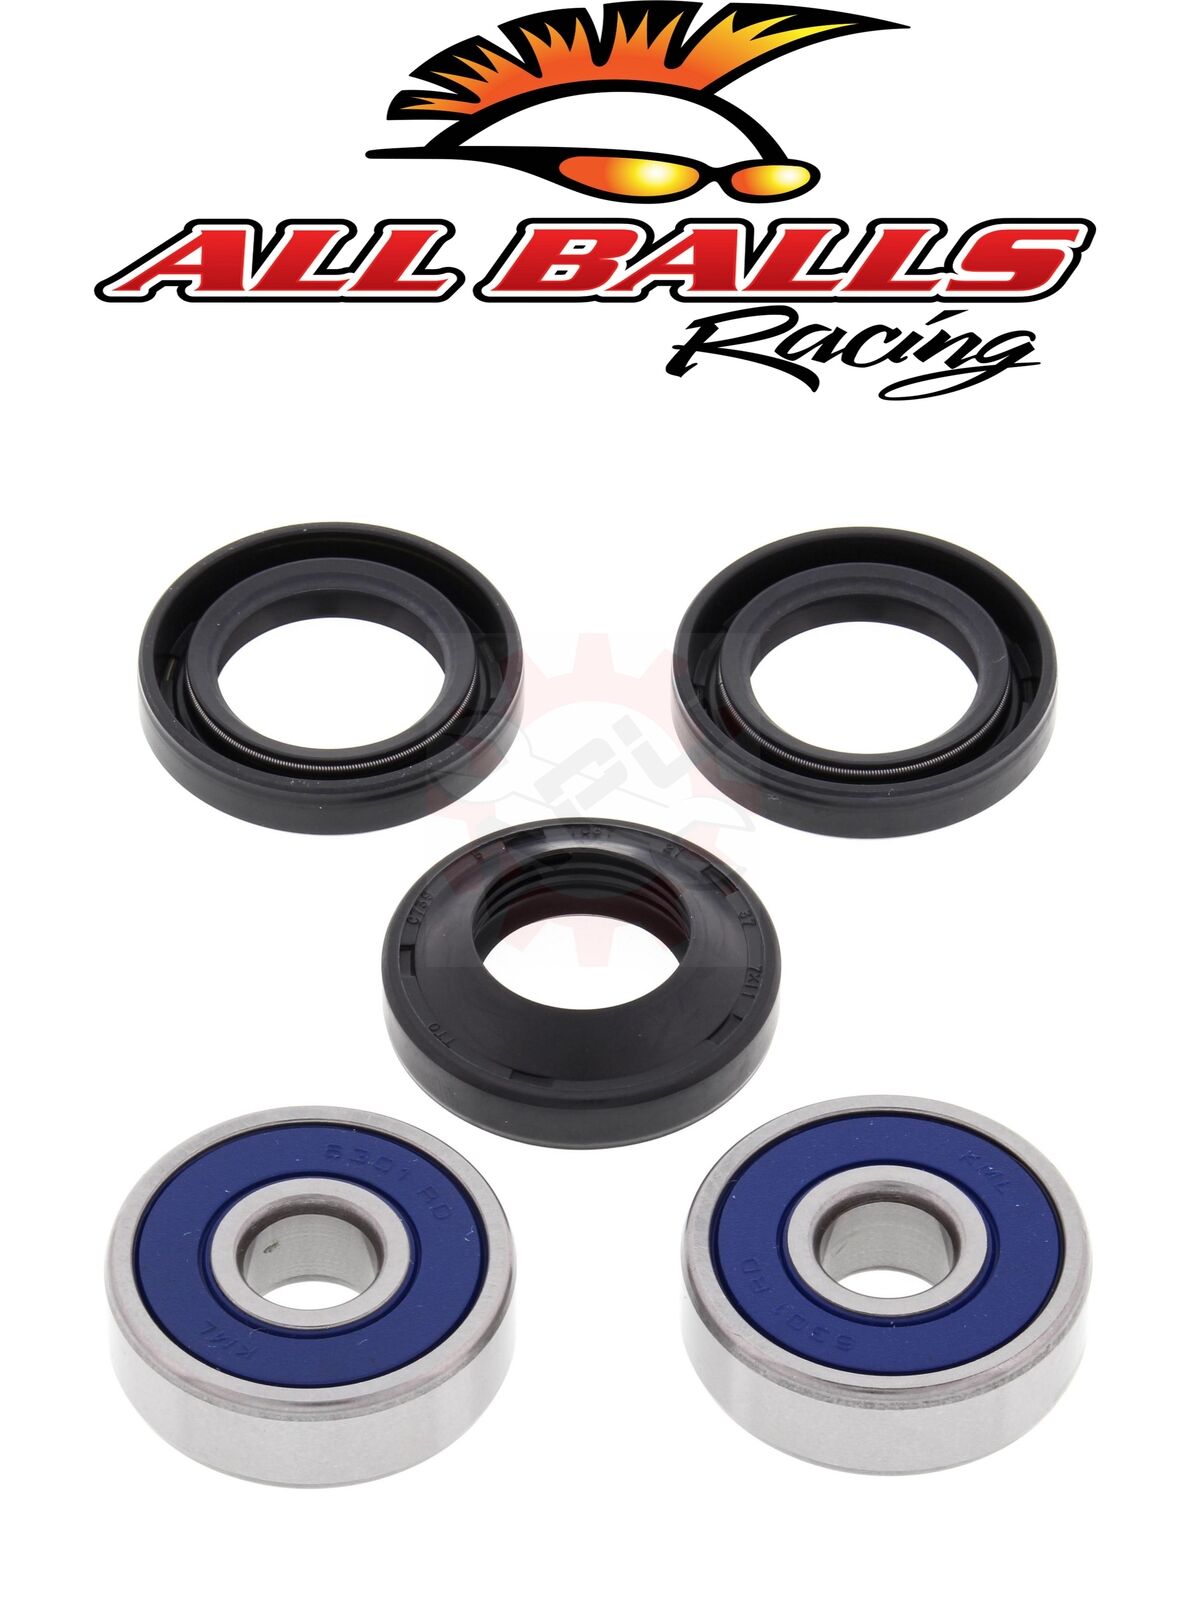 Front Wheel Bearings CT90 CT110 SL70 XR100 XR200 70's 80's ALL BALLS 25-1072